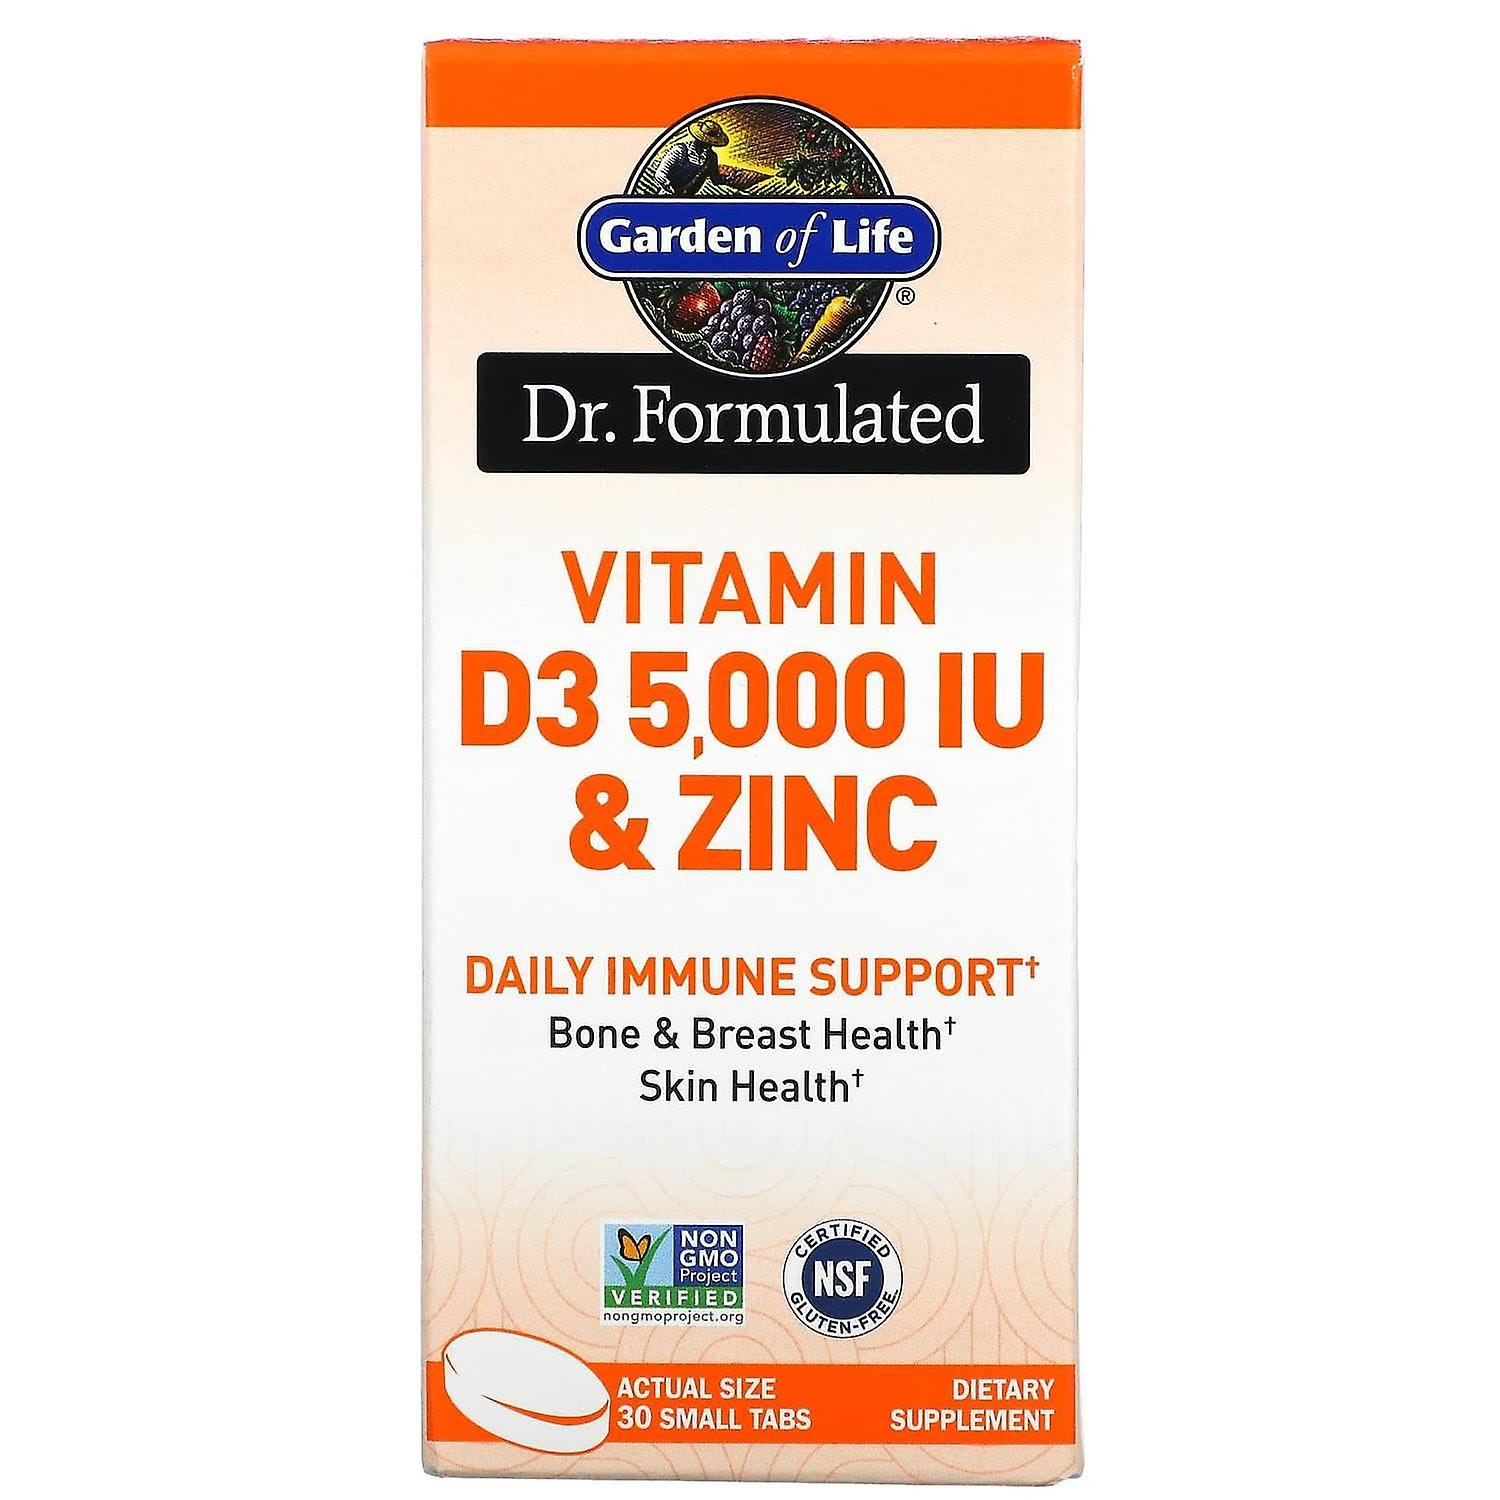 Garden of Life Dr. Formulated Vitamin D3 & Zinc 30 Small Tabs